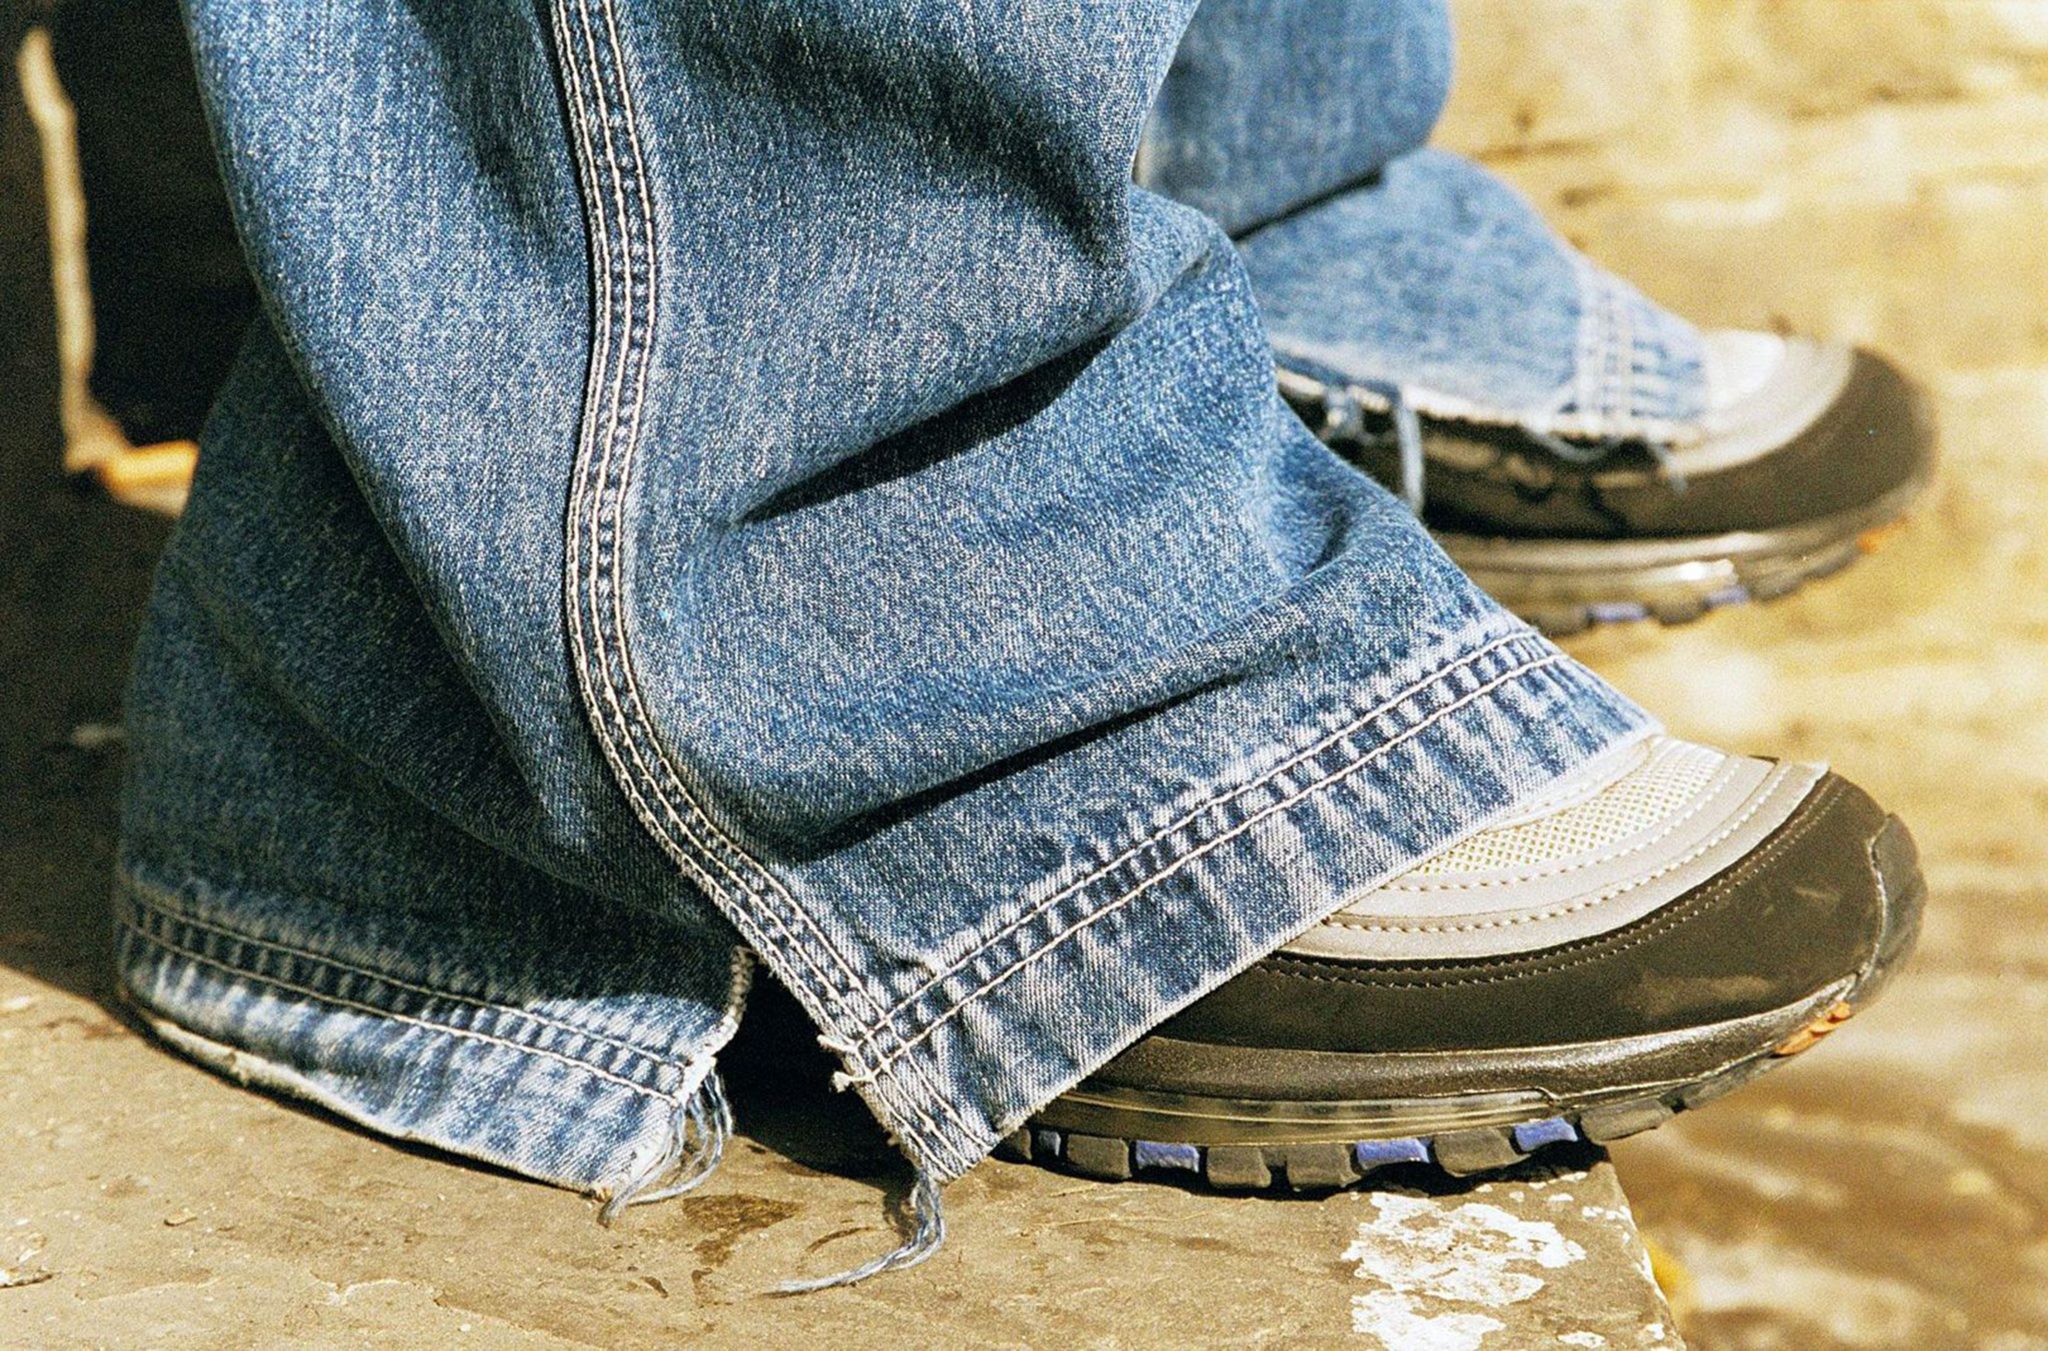 bootcut jeans with tennis shoes